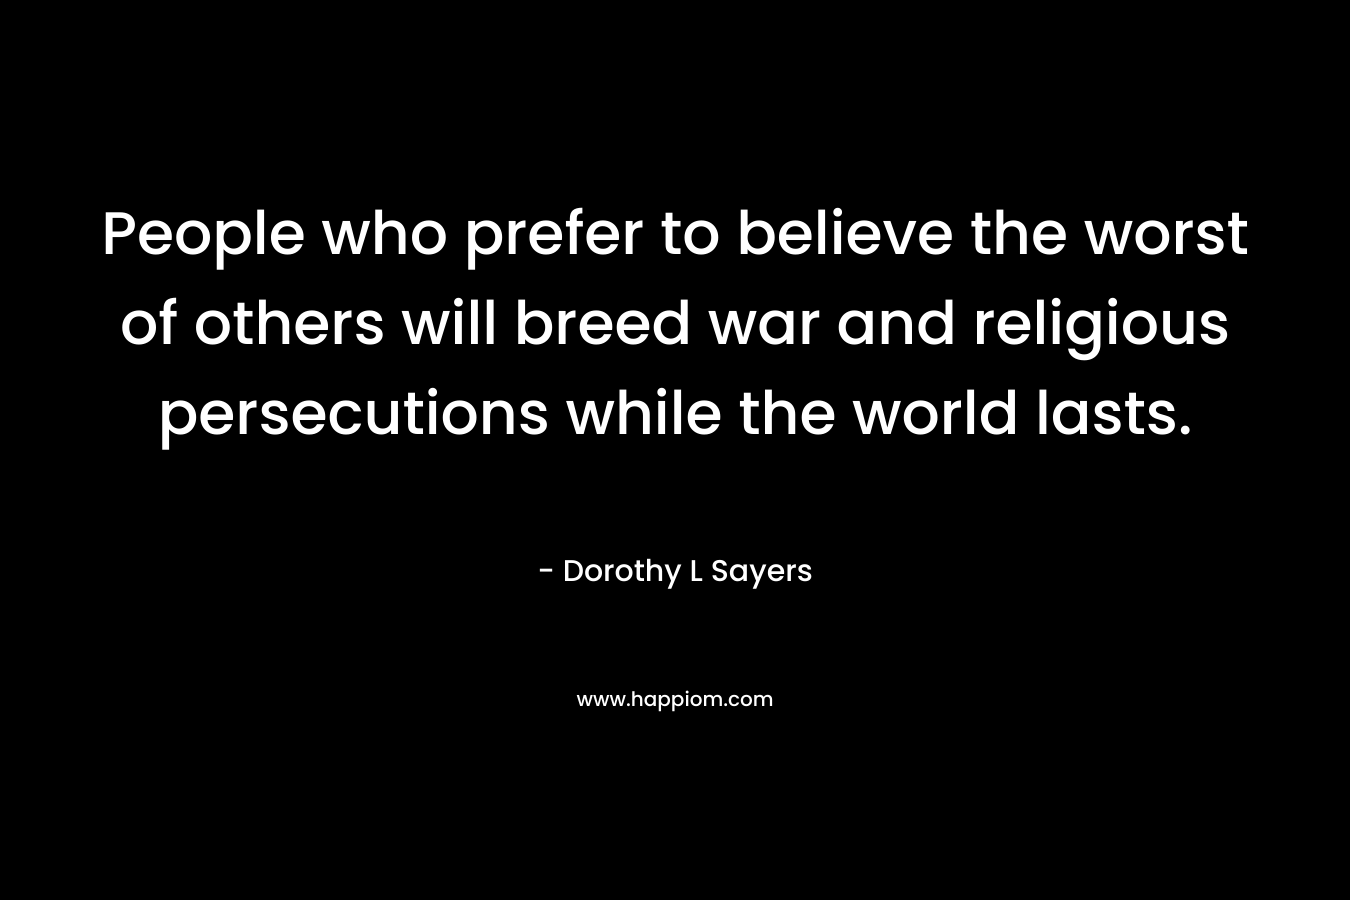 People who prefer to believe the worst of others will breed war and religious persecutions while the world lasts. – Dorothy L Sayers